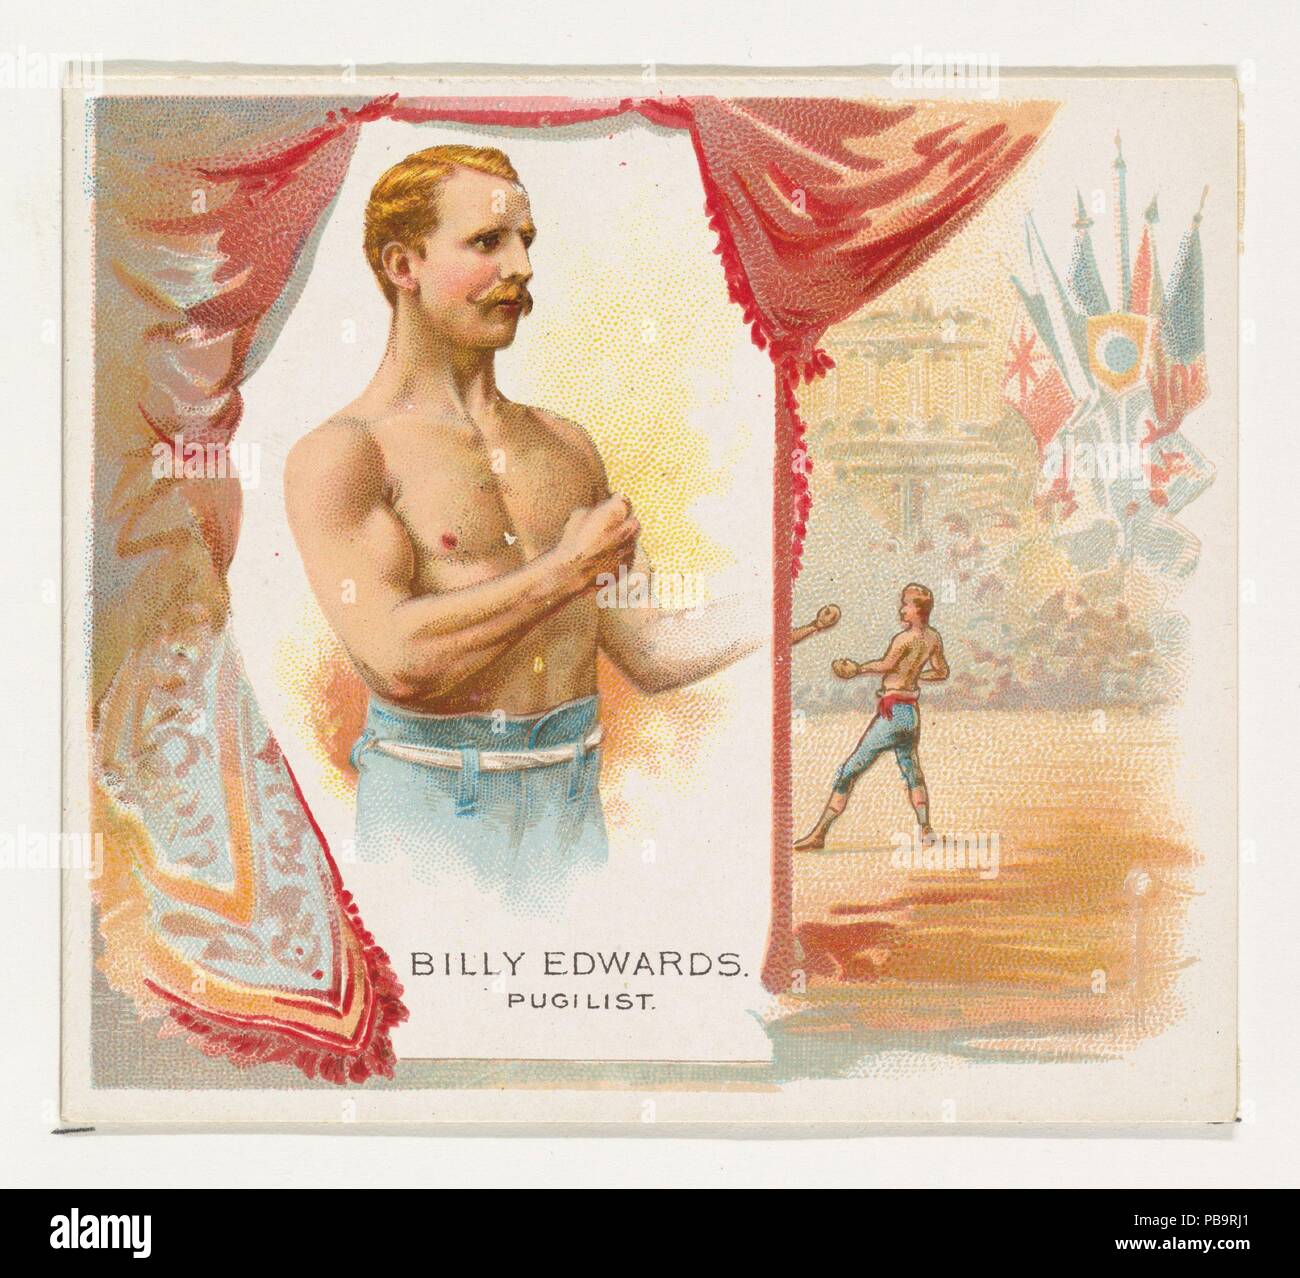 Billy Edwards, Pugilist, from World's Champions, Second Series (N43) for Allen & Ginter Cigarettes. Dimensions: Sheet: 2 15/16 x 3 1/4 in. (7.4 x 8.3 cm). Lithographer: Lindner, Eddy & Claus (American, New York). Publisher: Allen & Ginter (American, Richmond, Virginia). Date: 1888.  Trade cards from 'World's Champions,' Second Series (N43), issued in 1888 in a set of 50 cards to promote Allen & Ginter brand cigarettes. Museum: Metropolitan Museum of Art, New York, USA. Stock Photo